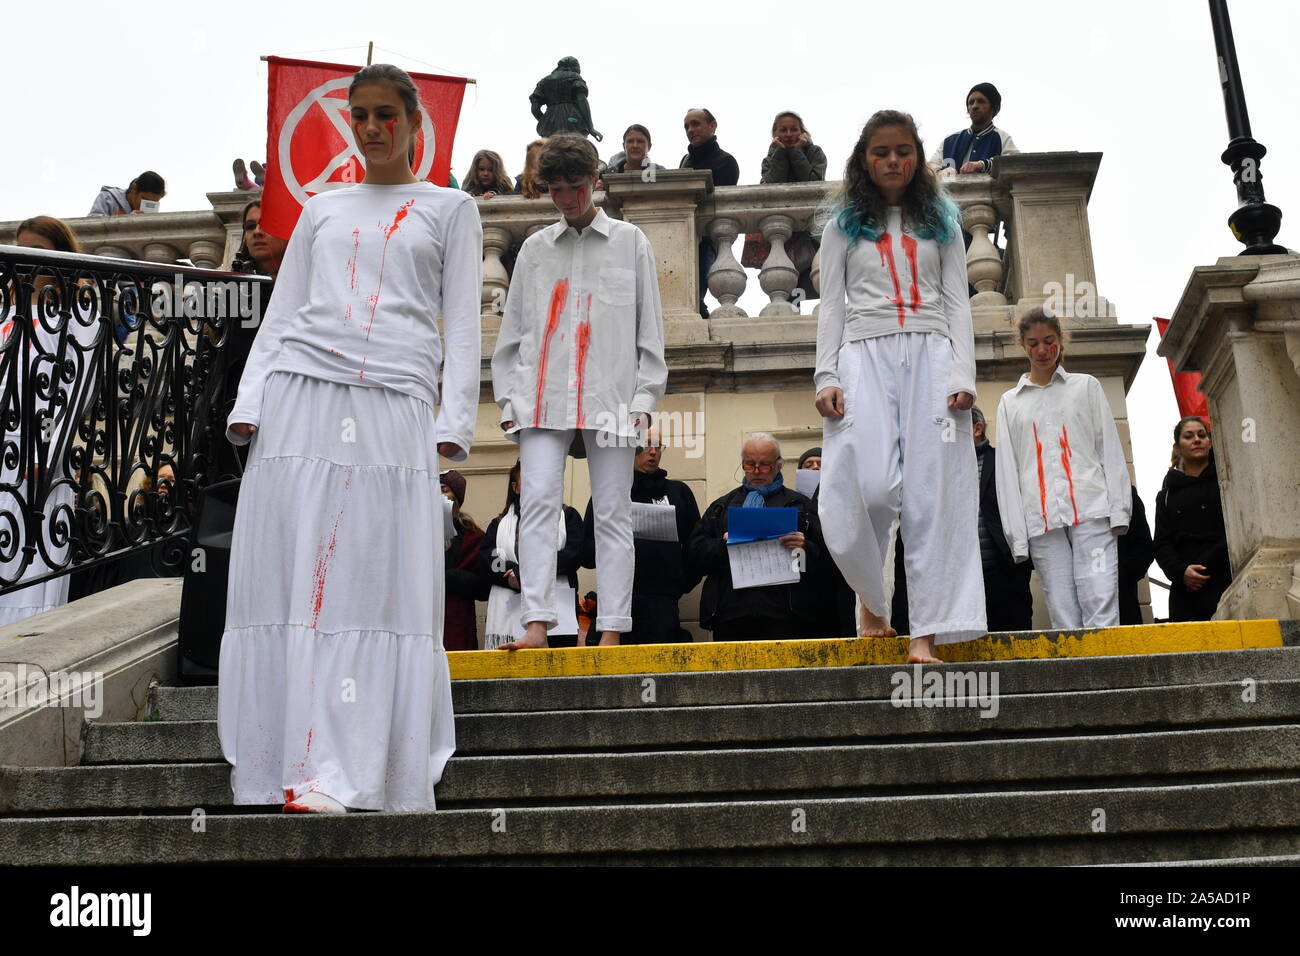 Vienna, Austria. 19th October, 2019. Action Extinction Rebellion 'The Blood of Our Children', performance on the fatal effects of the climate crisis and collapse of ecosystems on 19 October 2019 in Vienna. Credit: Franz Perc / Alamy Live News Stock Photo